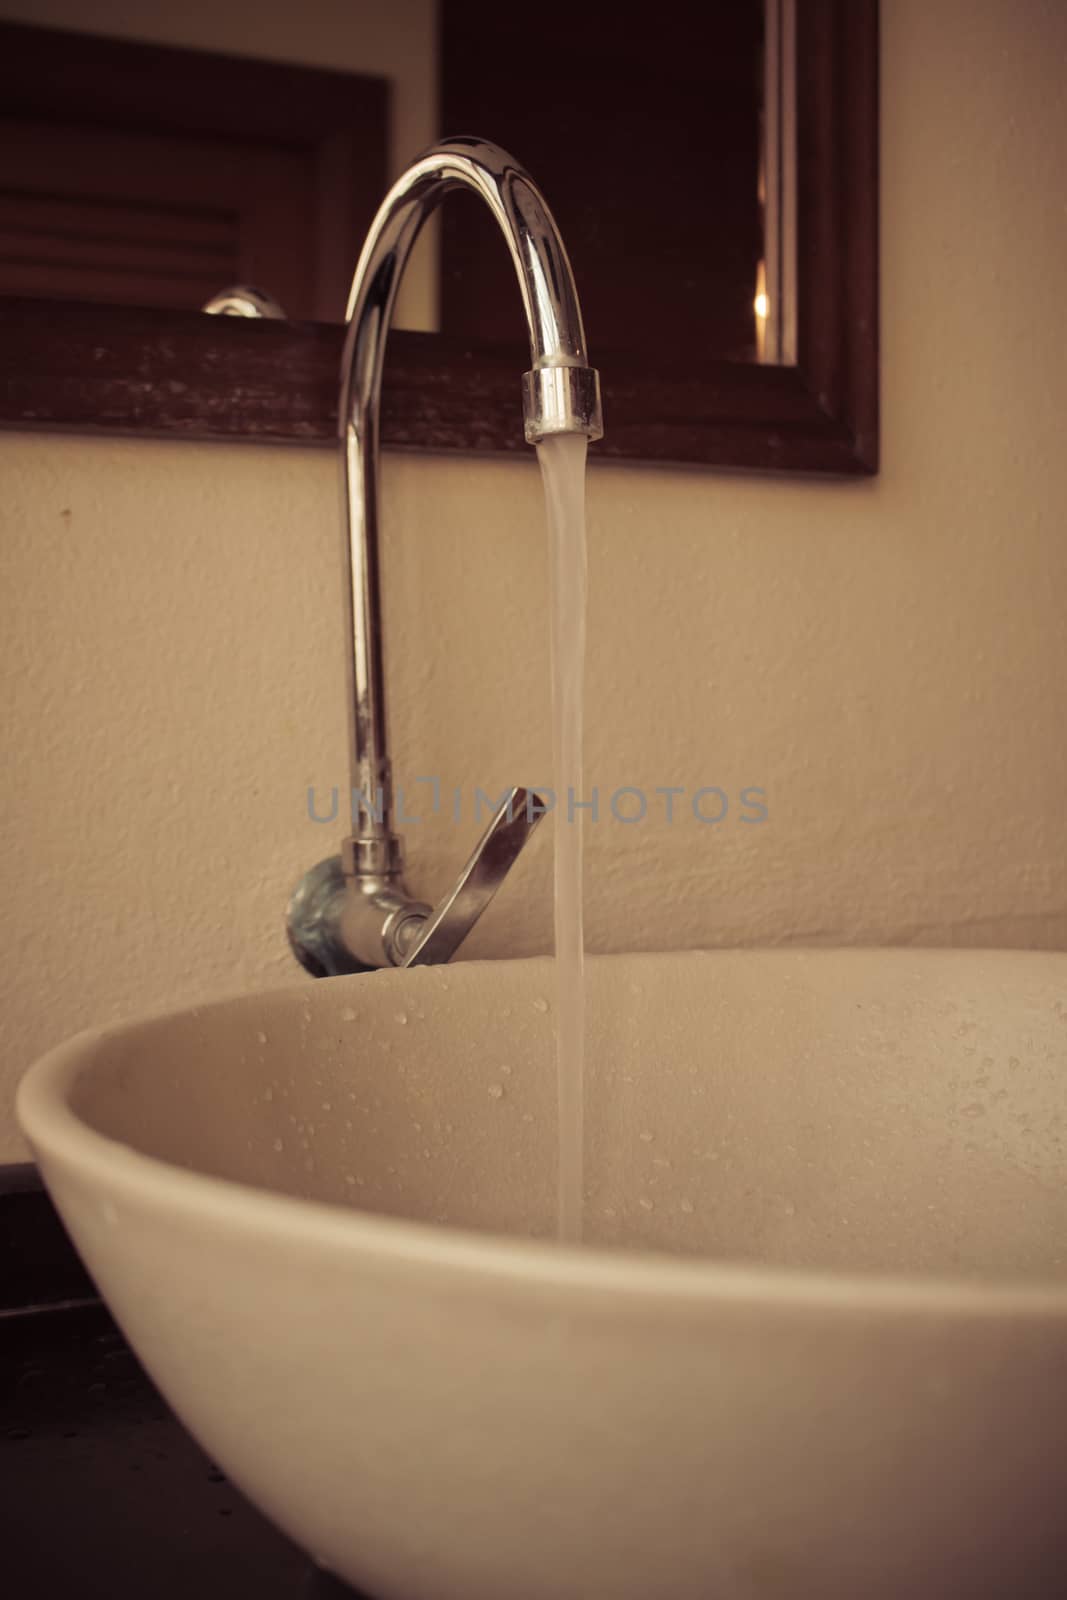 Water tap in the bathroom by worrayuth